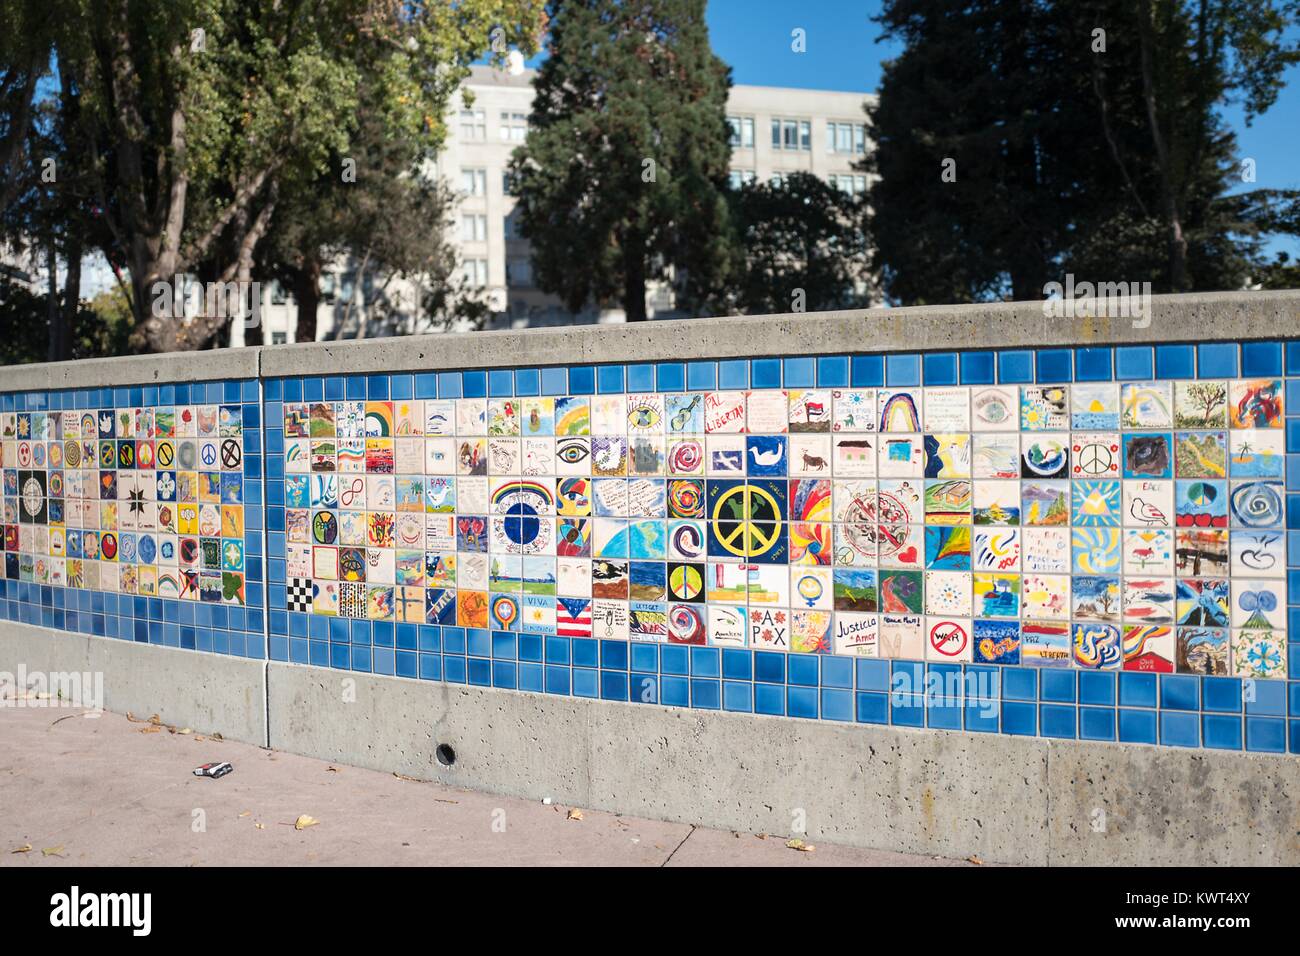 Berkeley World Wall of Peace at Martin Luther King Jr Civic Center Park in Berkeley, California, which was the site of violent 2017 protests and clashes between members of the alt-right and counter protesters, October 6, 2017. () Stock Photo